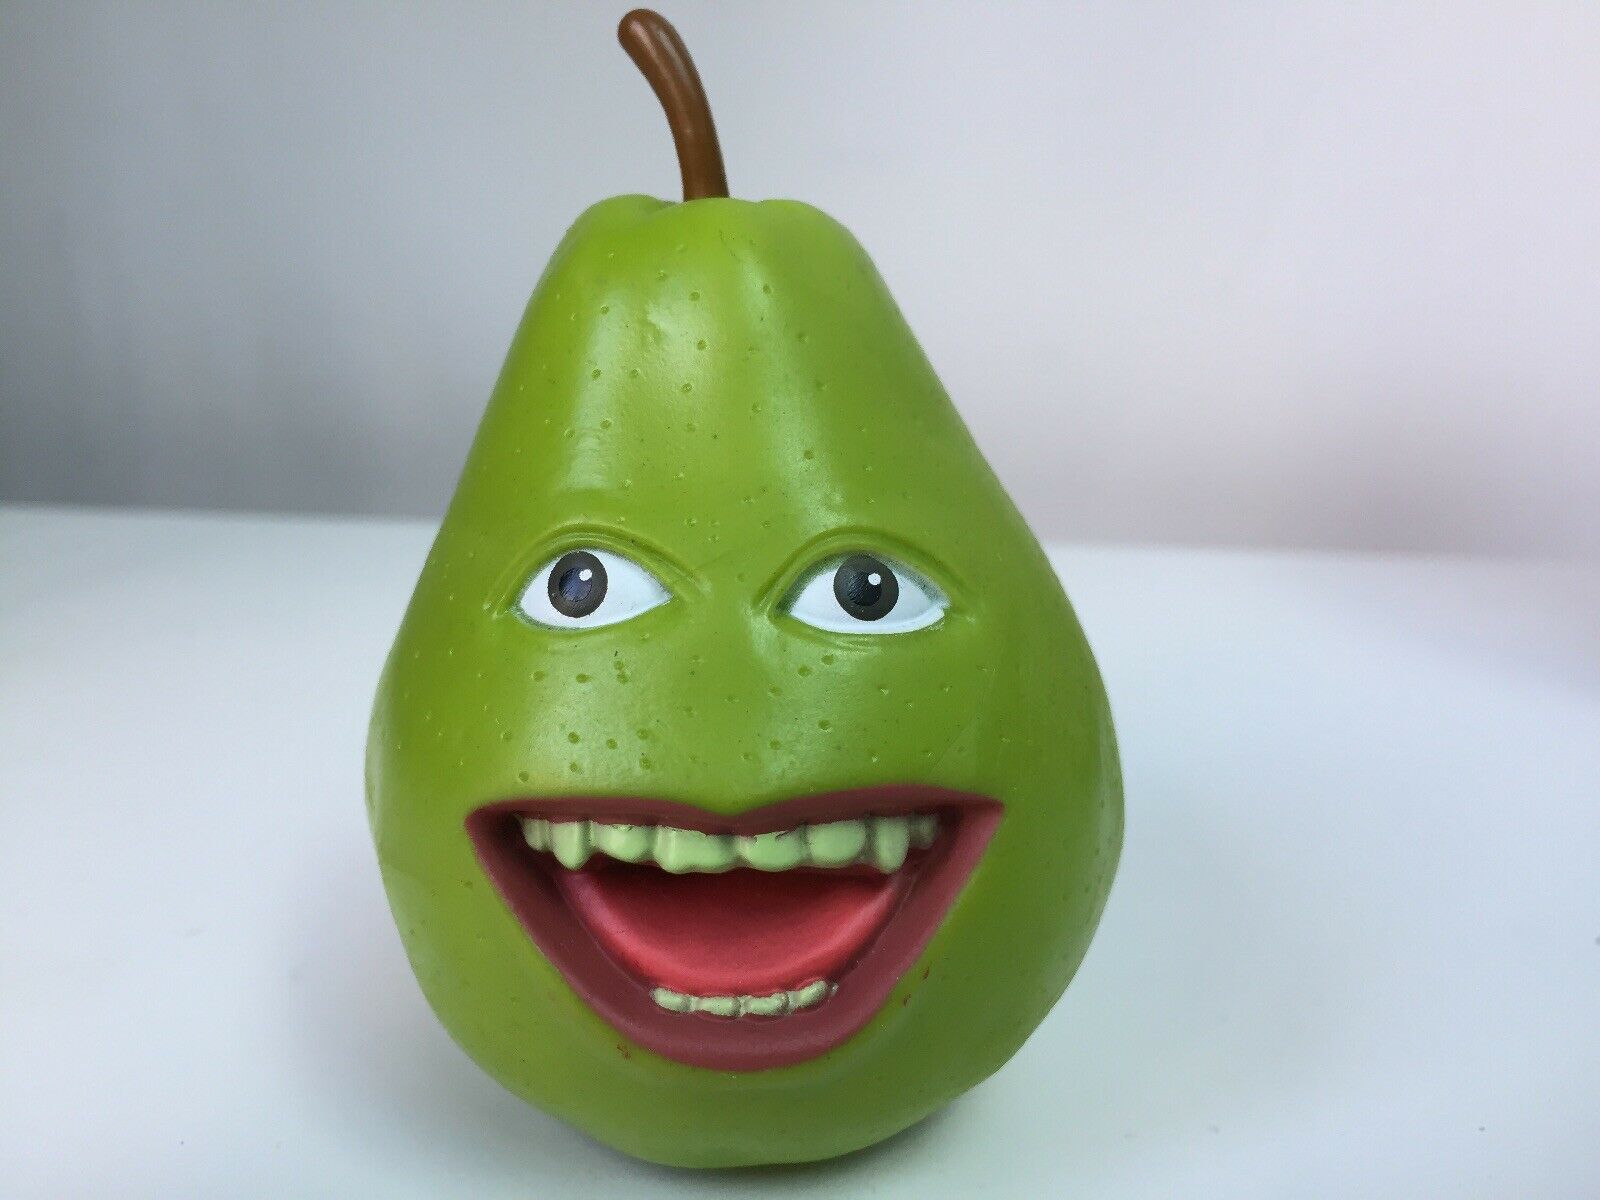 Pear Talking Toy 2011 The Rare Oovlpx6904-tv & Movie - Seedless Fruit , HD Wallpaper & Backgrounds